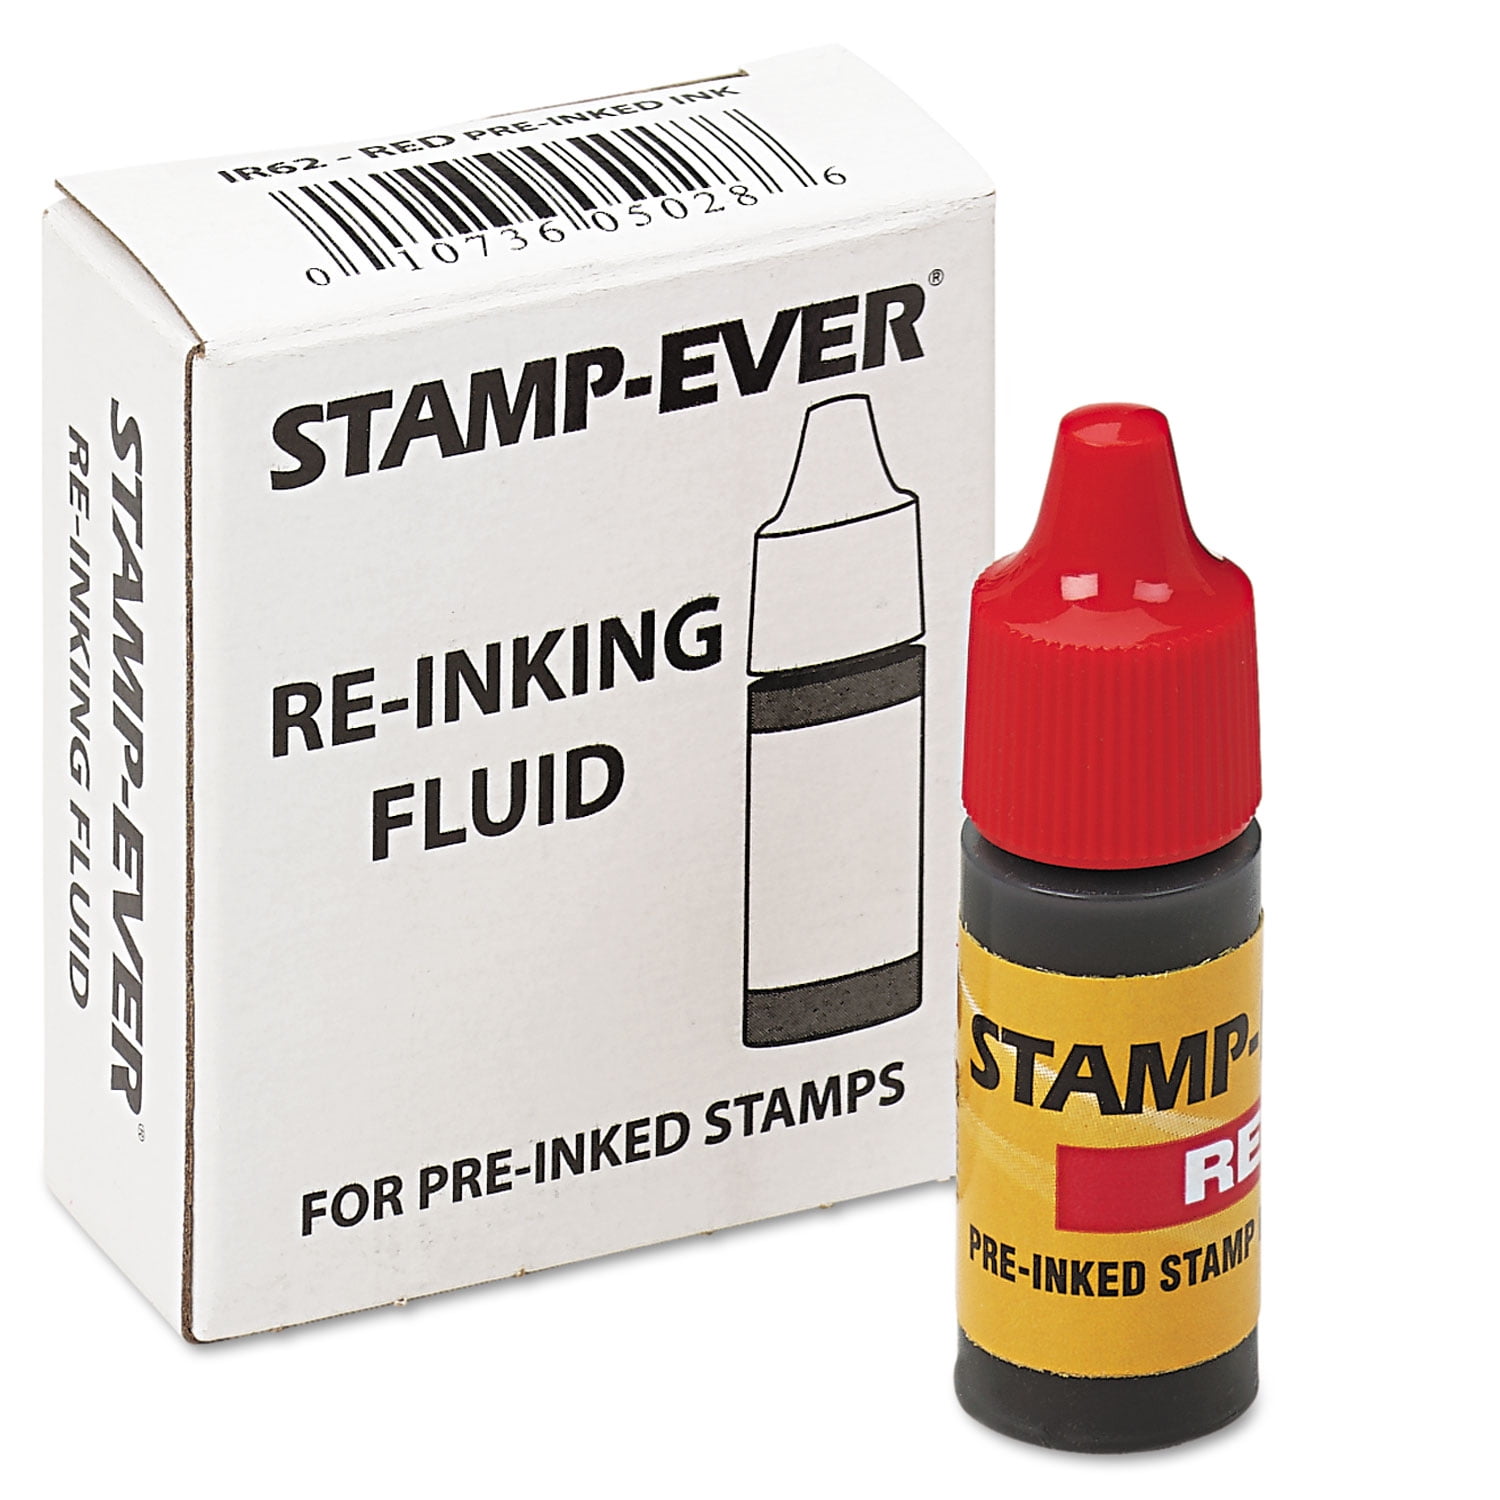 Stamp-Ever, USS5028, Pre-inked Stamp Ink Refill, 1 Each, Red 